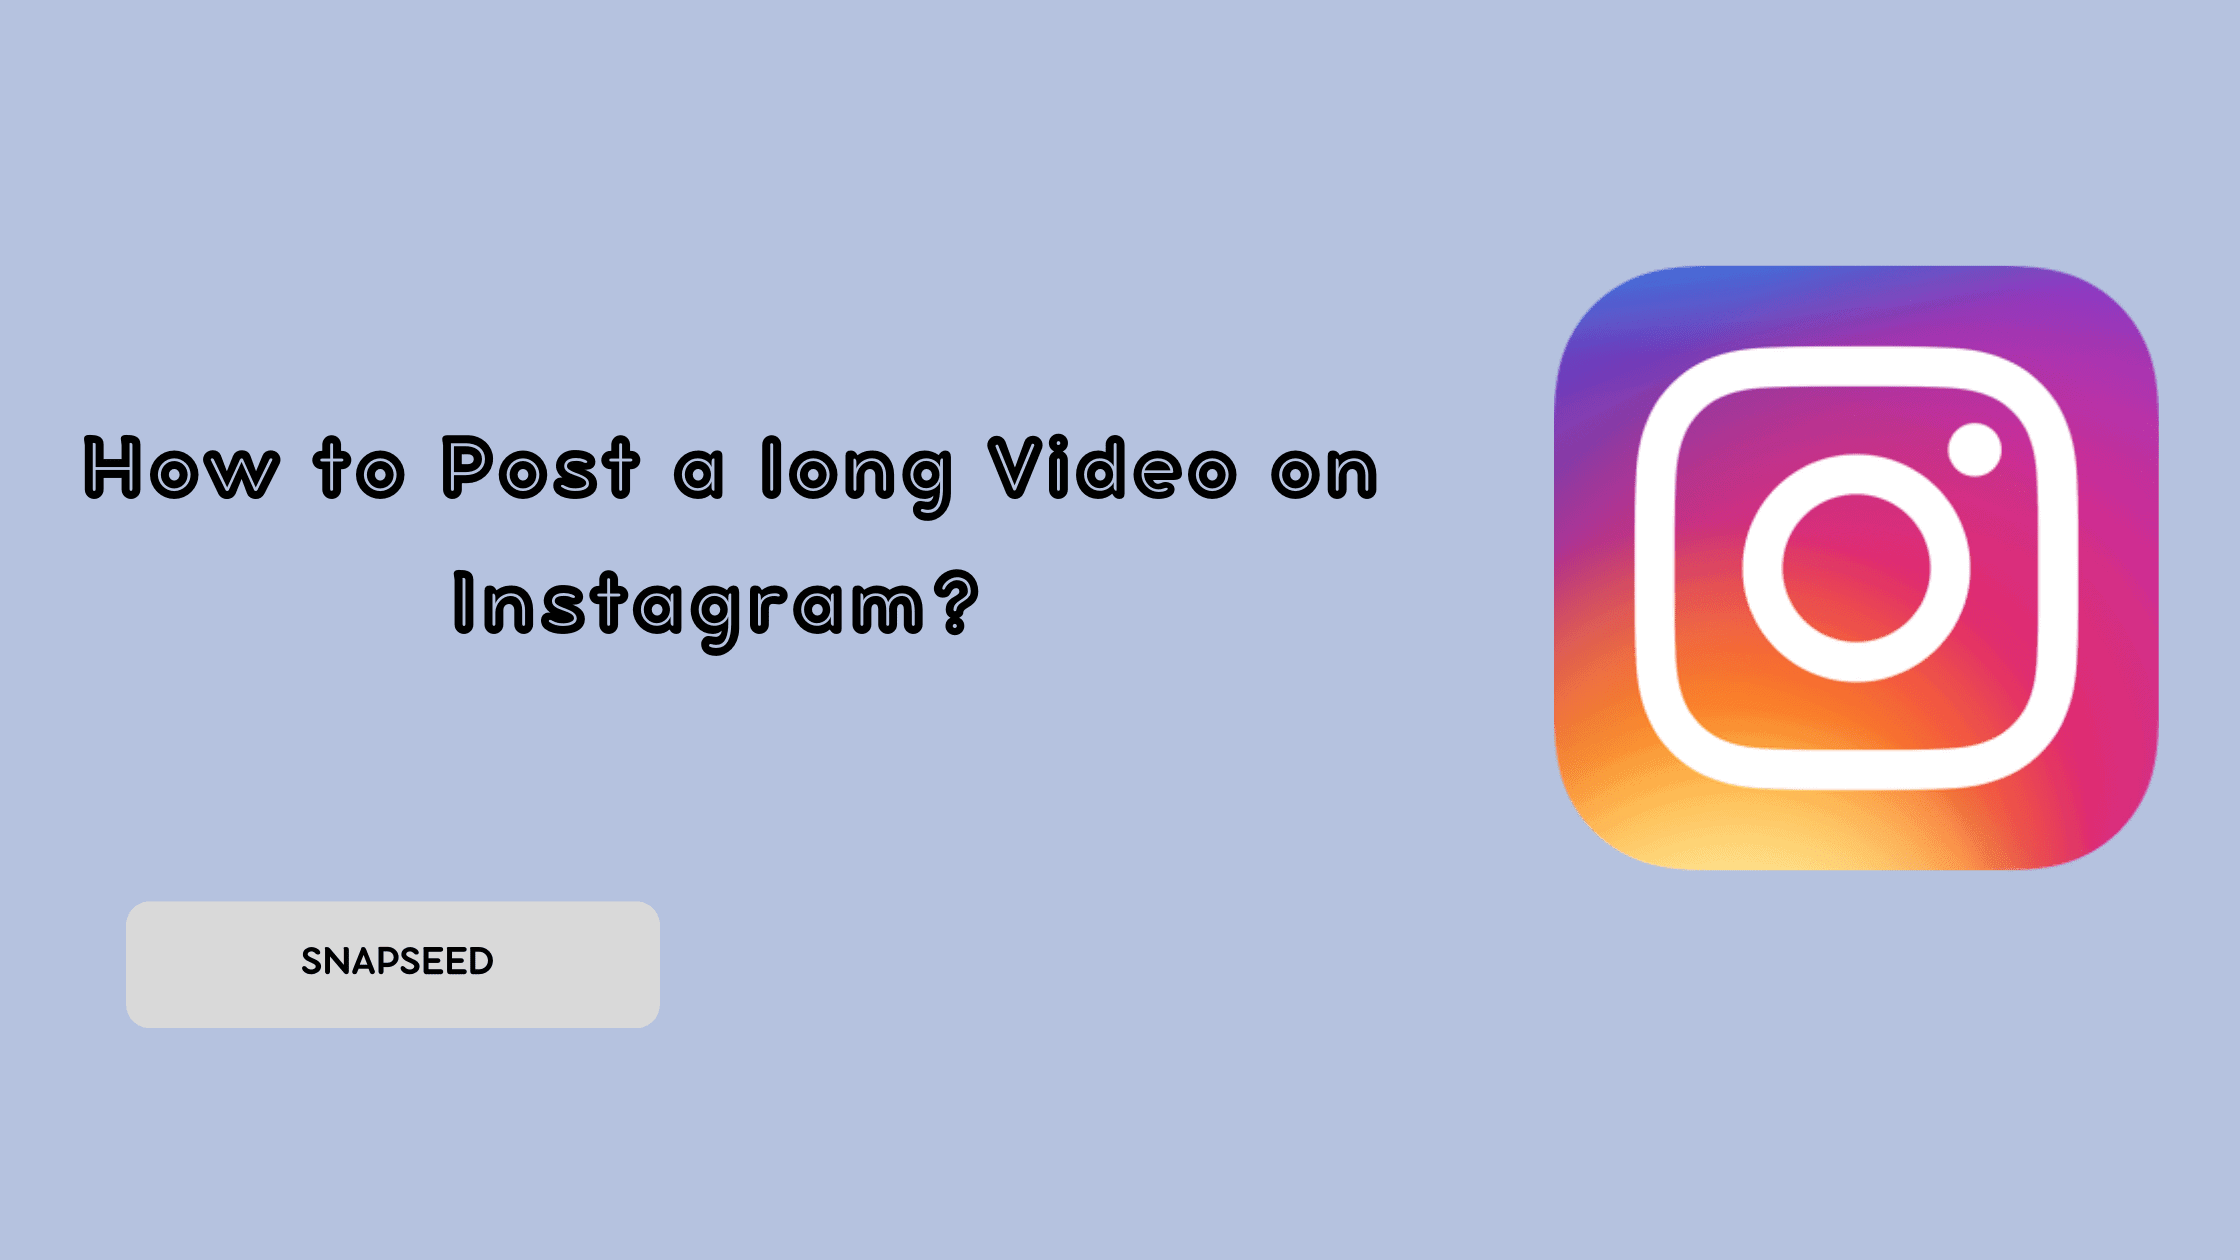 How to Post a long Video on Instagram?